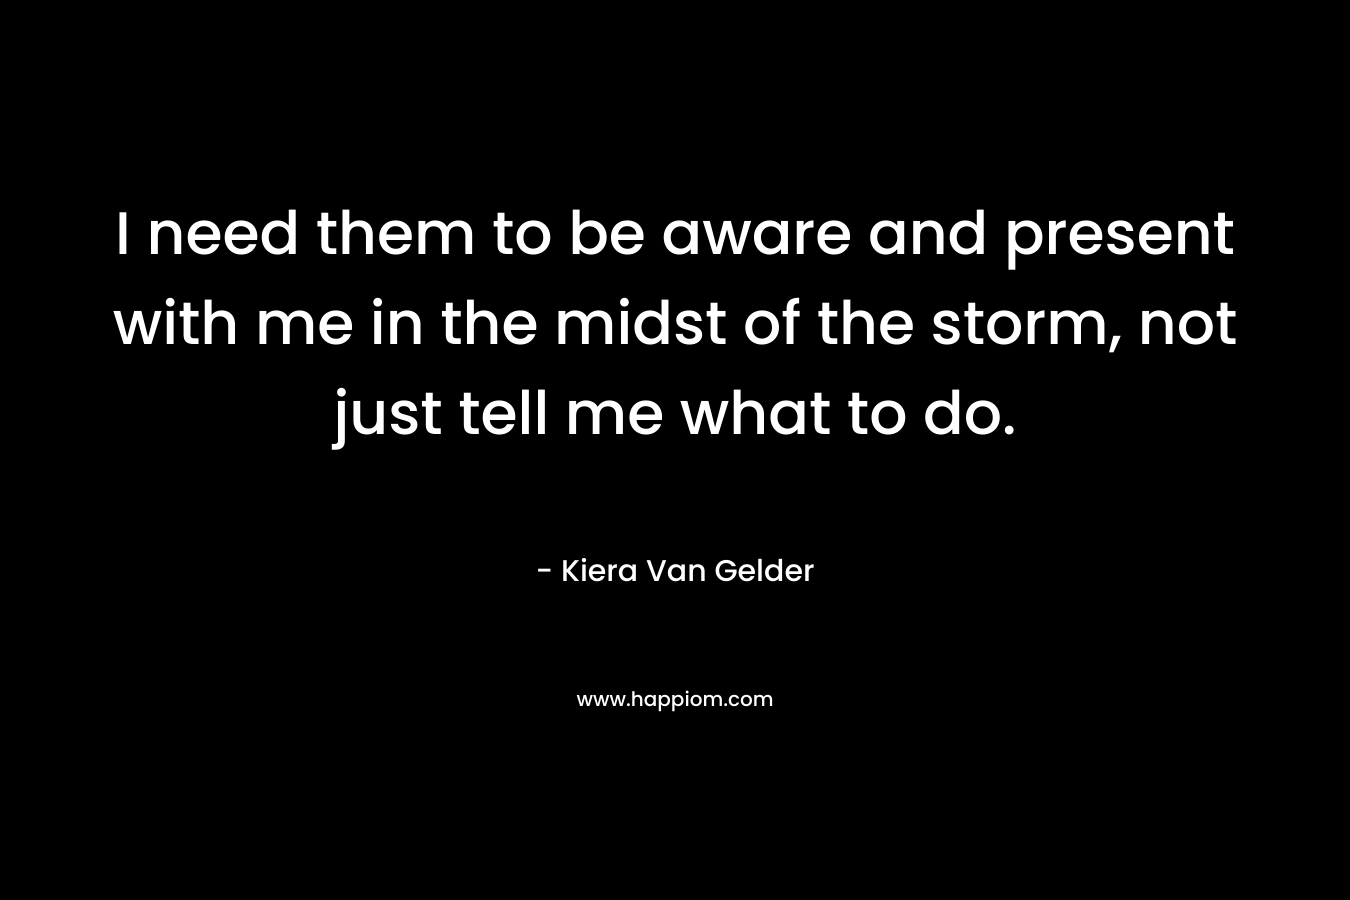 I need them to be aware and present with me in the midst of the storm, not just tell me what to do. – Kiera Van Gelder